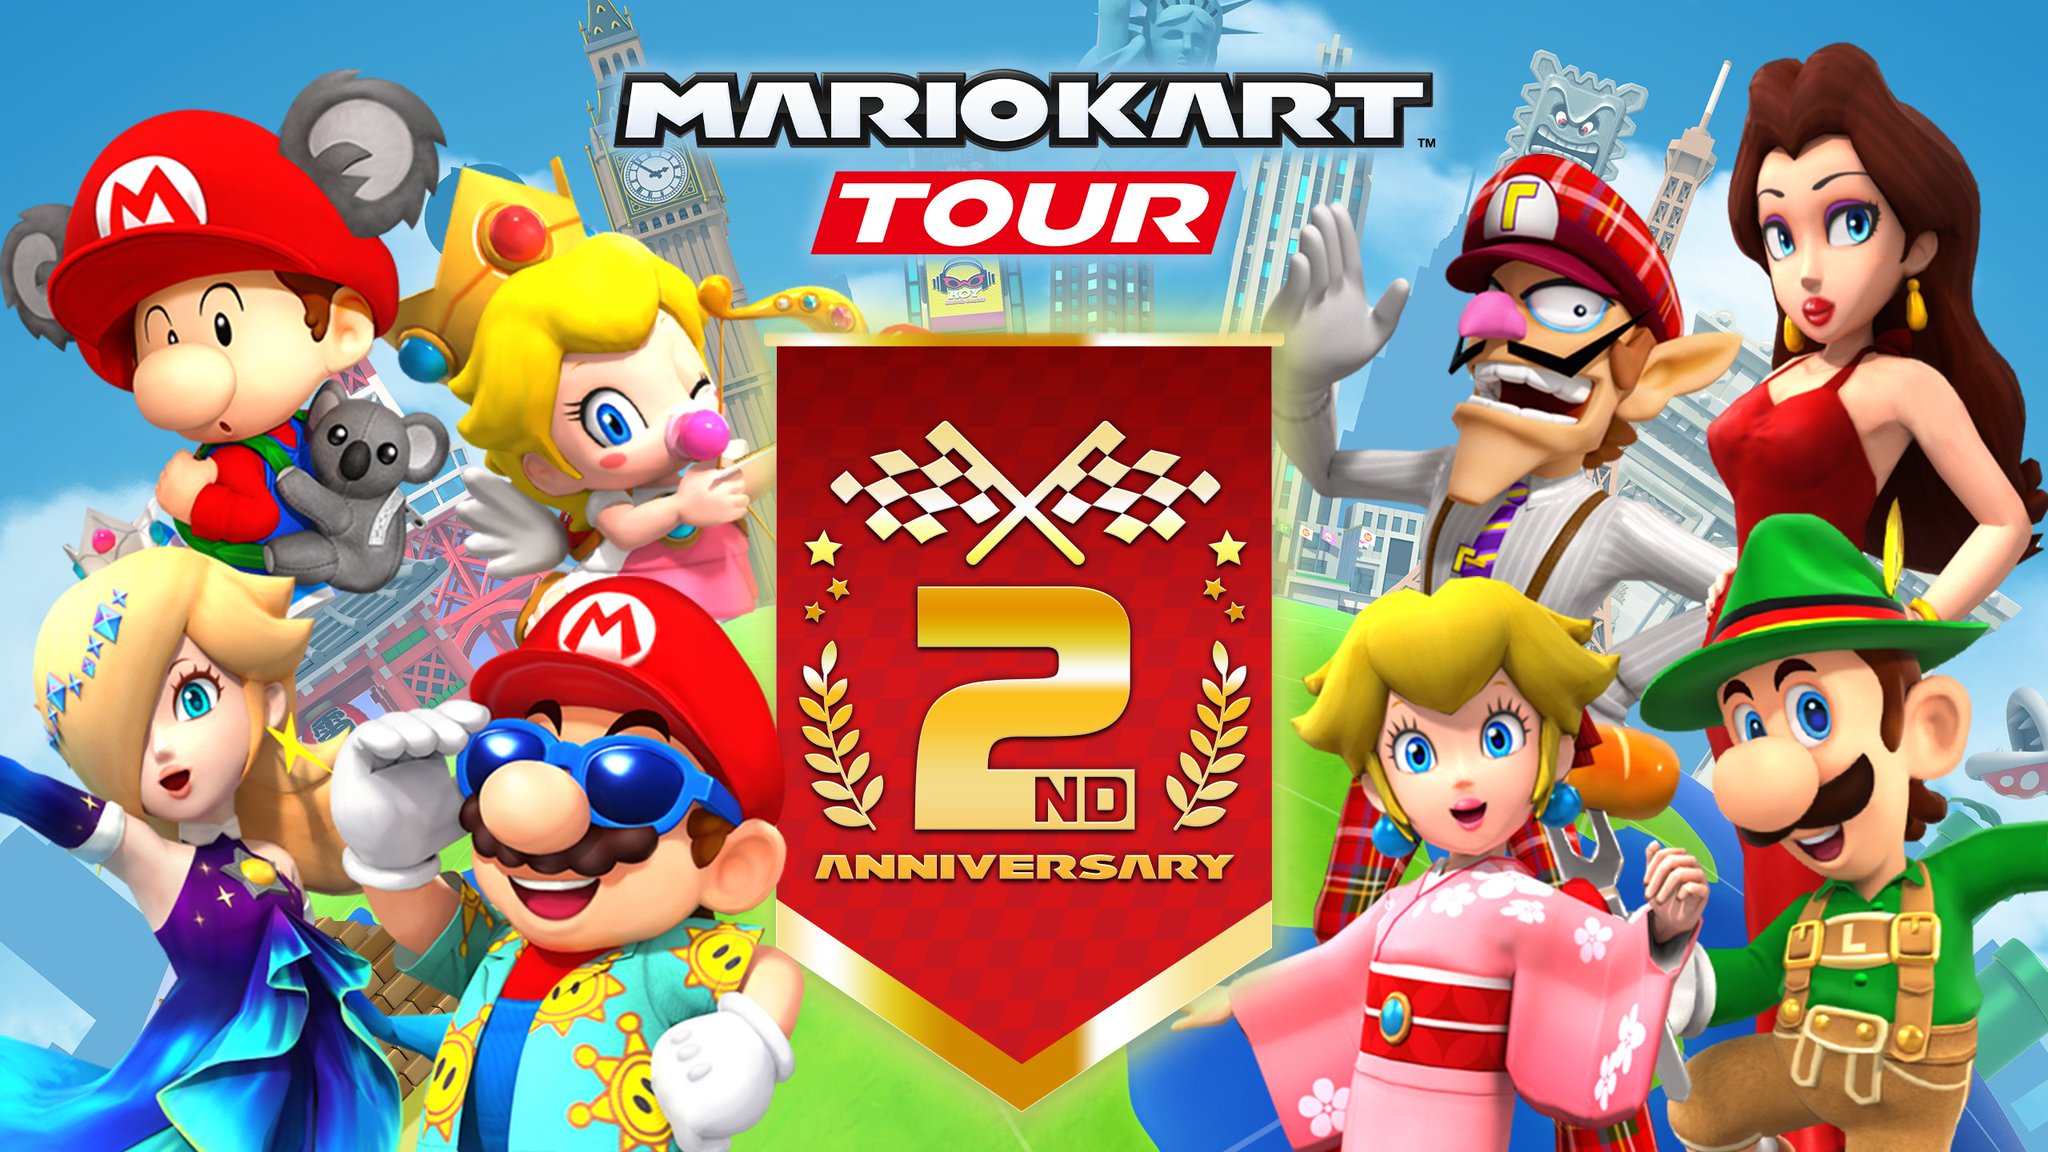 Mario Kart Tour on X: The Kamek Tour is wrapping up in #MarioKartTour.  Next up is the Sydney Tour! First we had a koala, but what's next?   / X